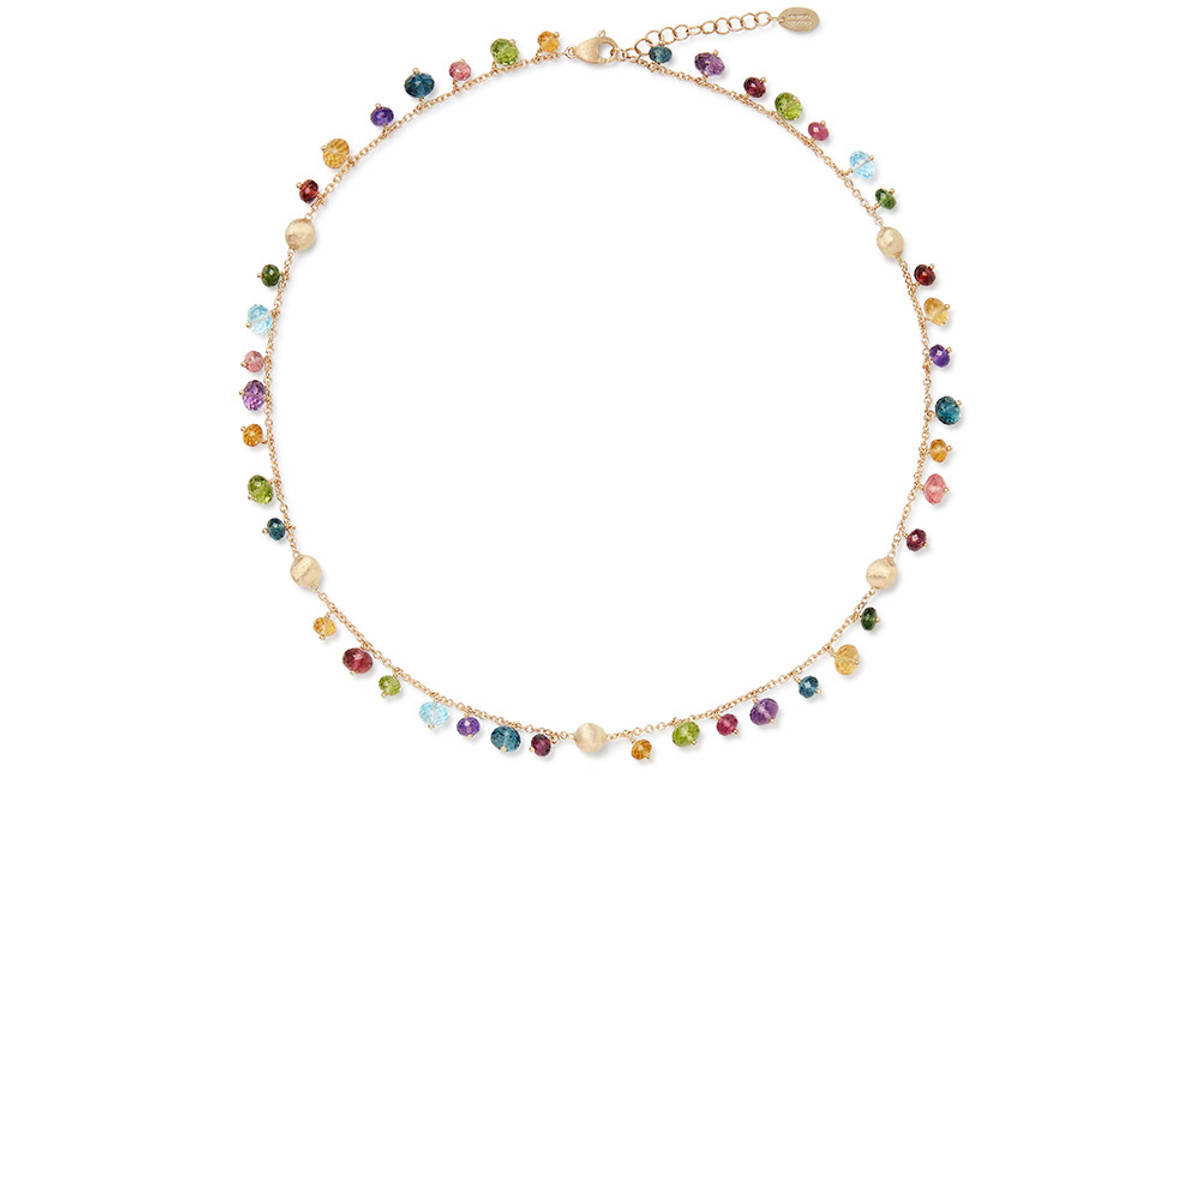 Marco Bicego Africa Collection 18K Yellow Gold Single-Strand Mixed Gemstone Necklace-61184 Product Image